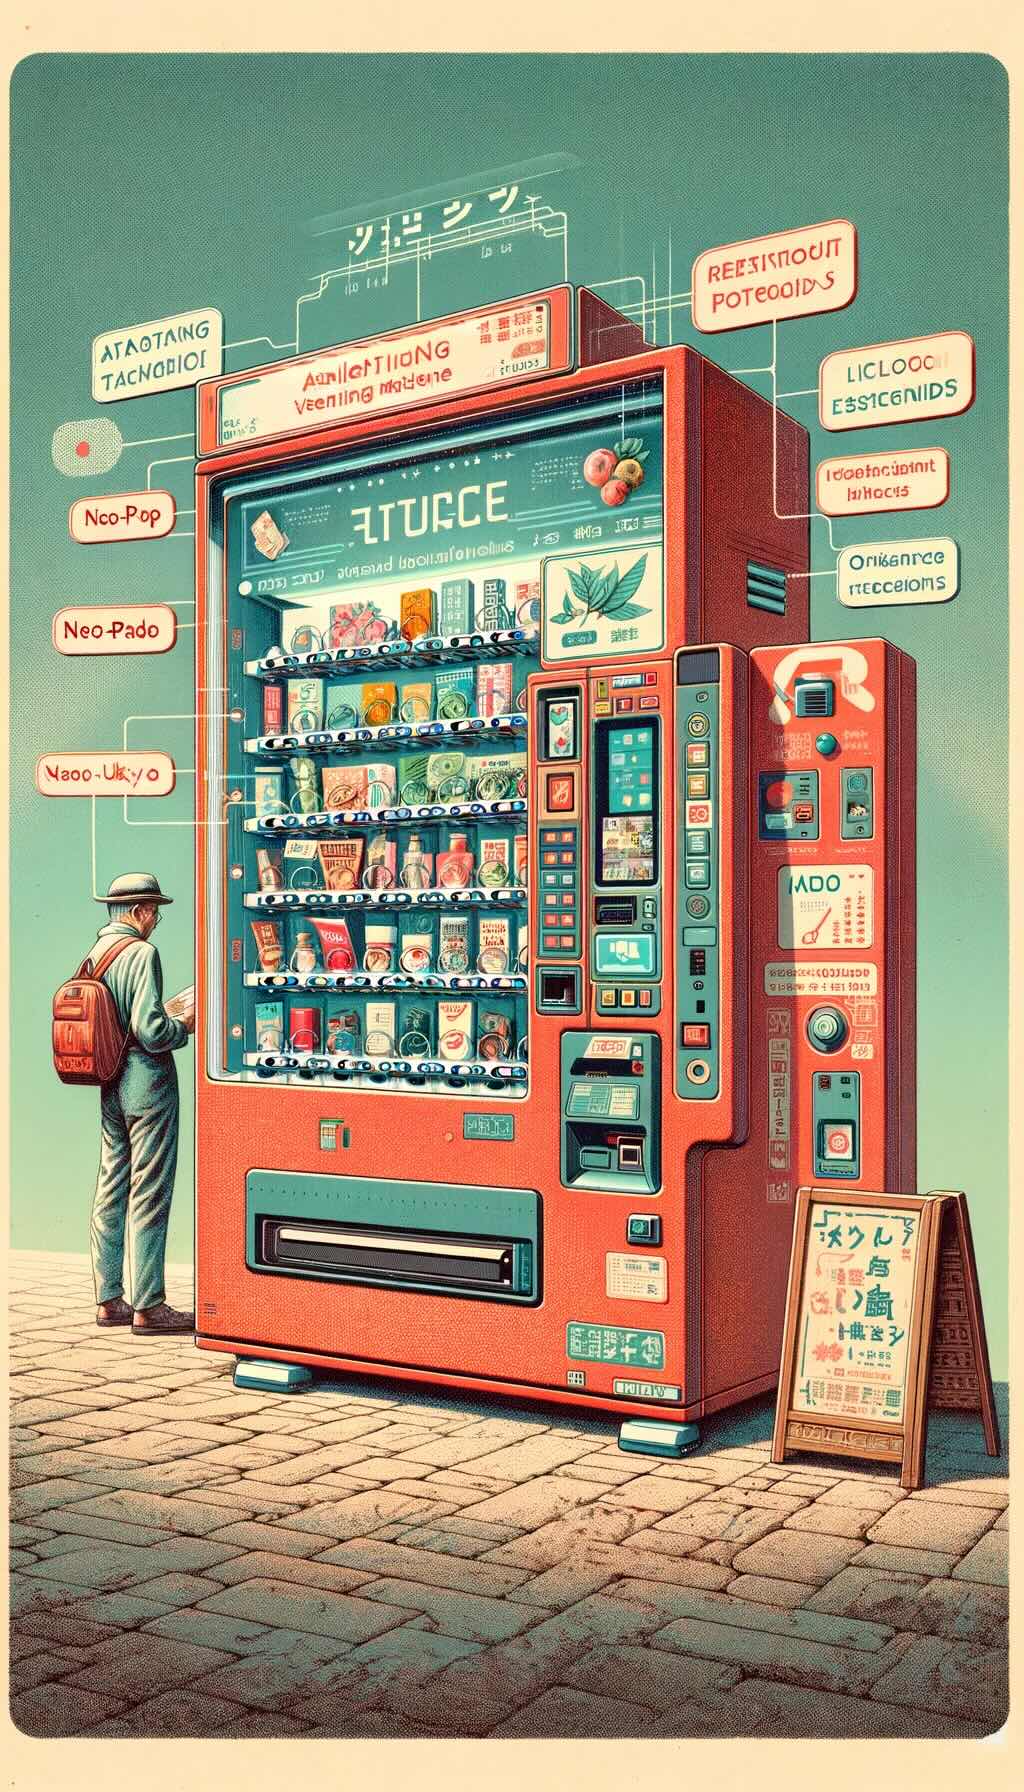 Future of Japan's vending machines, features advanced vending machines, but rendered with a nostalgic color palette and a faded aesthetic, providing a sense of vintage charm. These machines, while showcasing modern features like AI and facial recognition, are depicted in a retro style, dispensing a variety of products including eco-friendly items and health products, all imbued with a sense of nostalgia. The image captures scenes of interaction that blend the old and the new, such as individuals using a mobile app in a retro setting or elderly citizens accessing goods from these stylishly vintage machines. Overall, the artwork beautifully marries cutting-edge technology with a retro flair, reflecting a futuristic yet nostalgically toned evolution of Japan's vending machine culture.